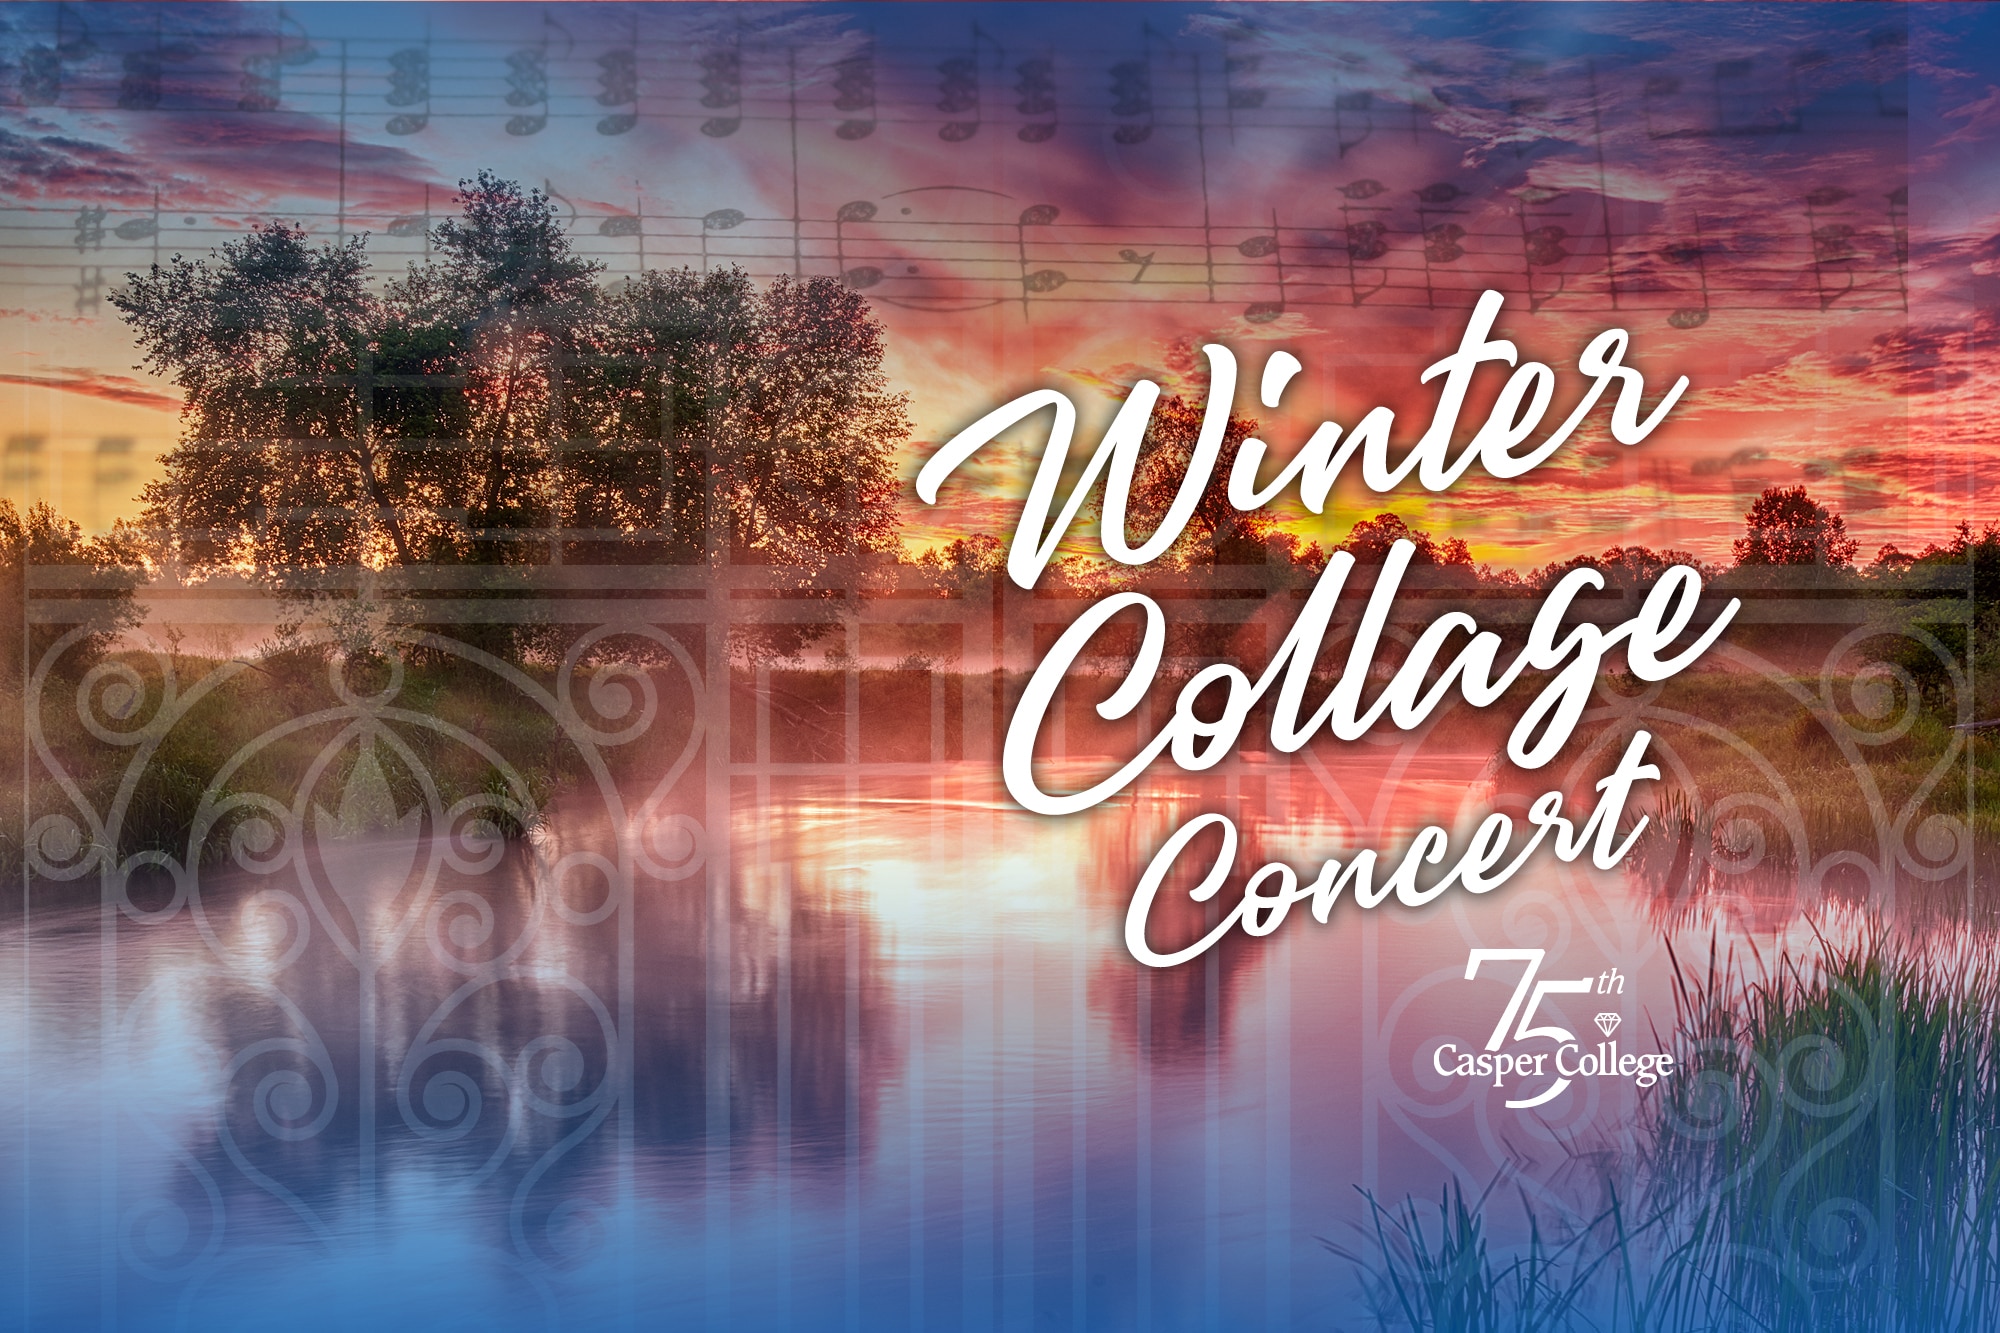 Winter Collage Concert will feature Casper College Chamber Orchestra, Wind Ensemble, Chamber Singers, and Collegiate Chorale